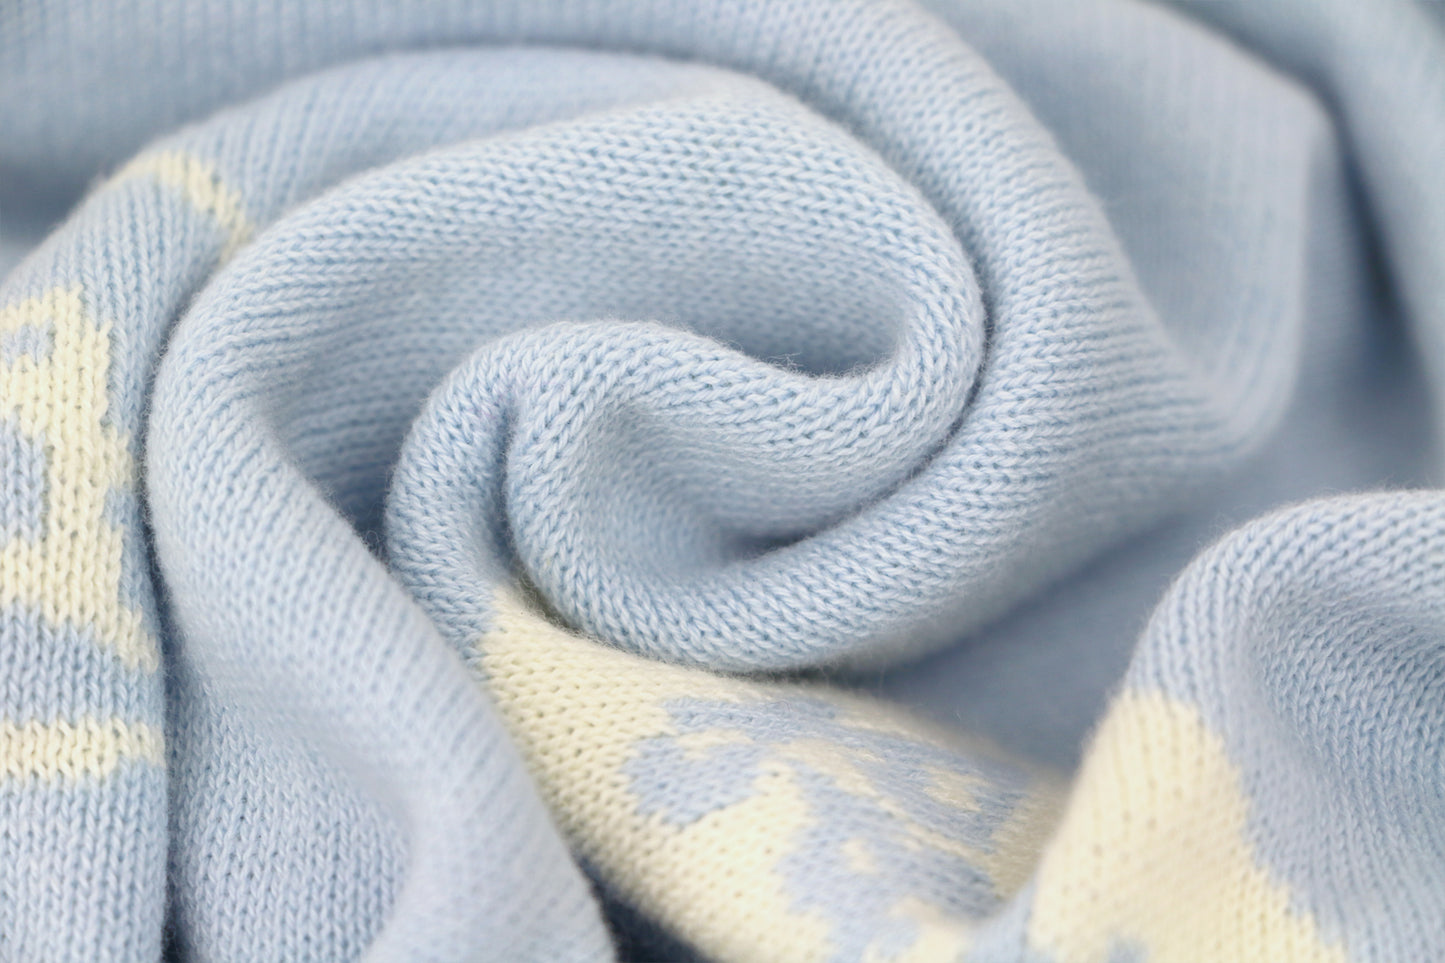 100% Cotton Luxury Double-Face Jacquard Knitted Blanket  (Blue & Cream)